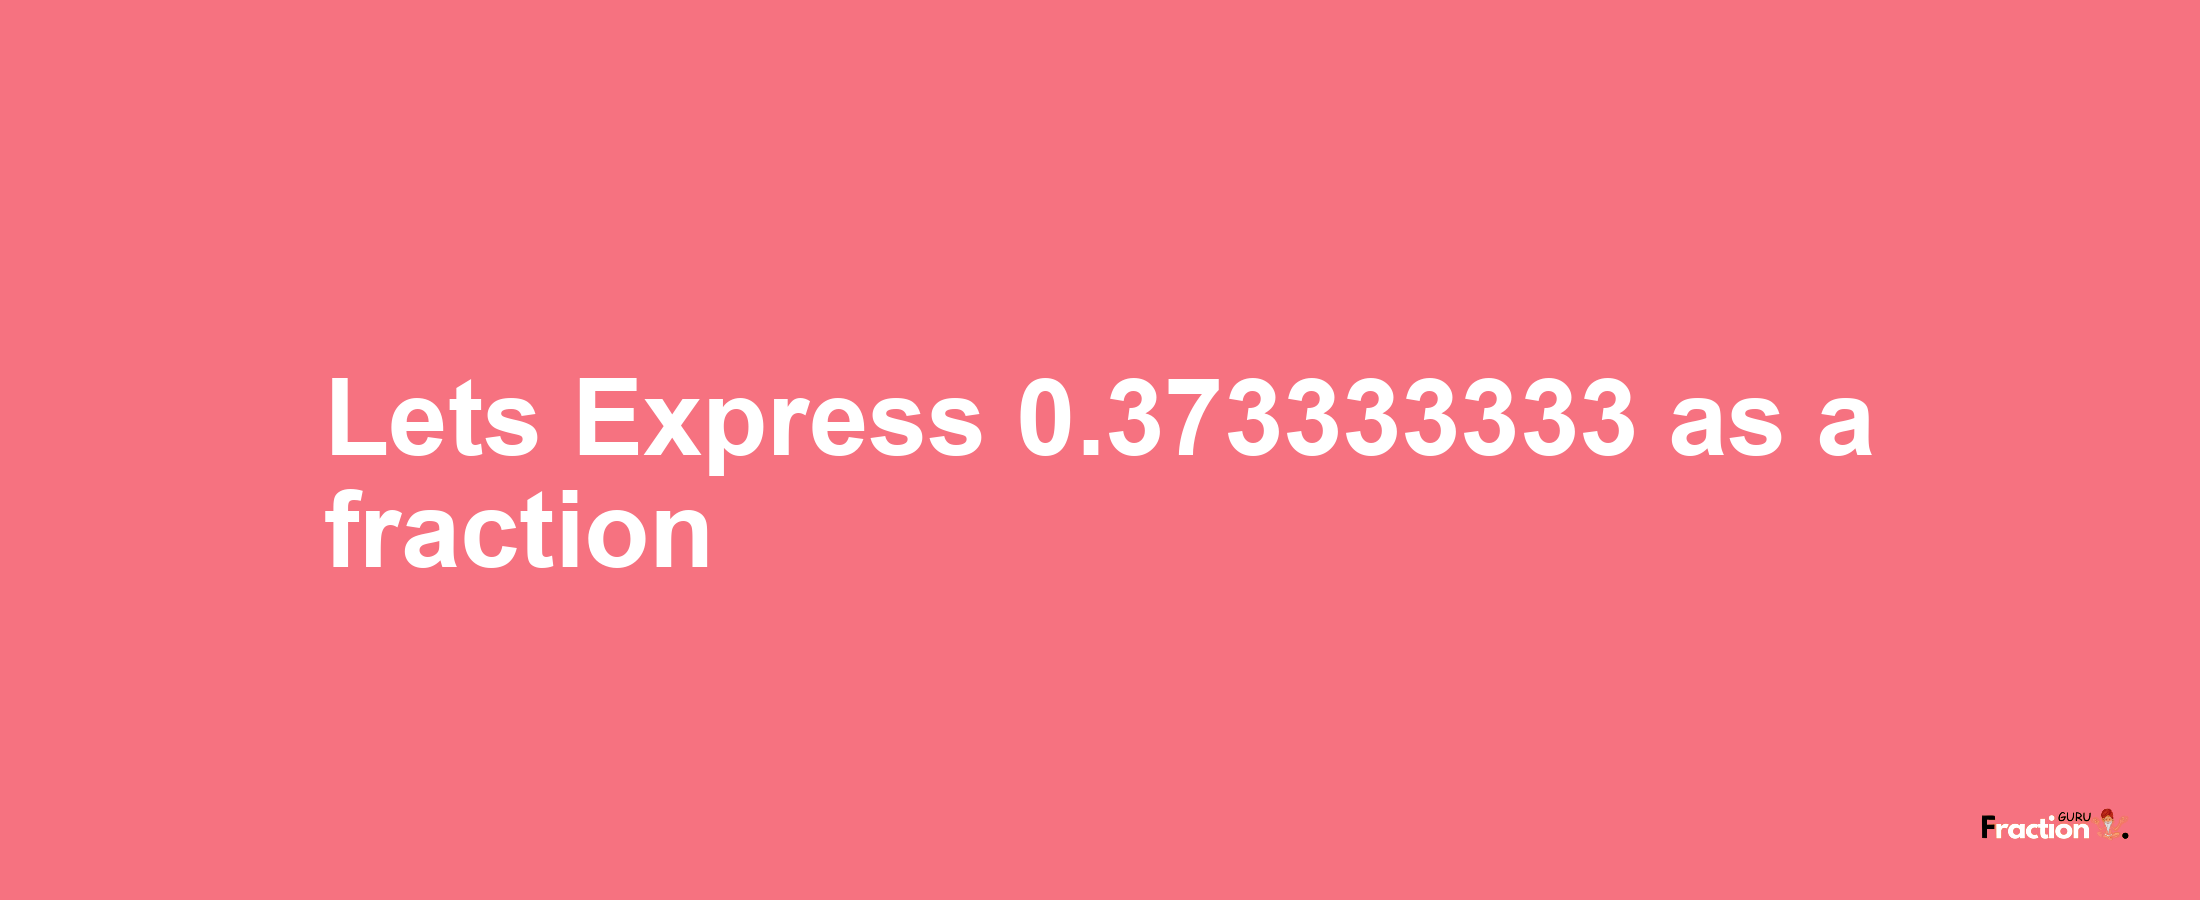 Lets Express 0.373333333 as afraction